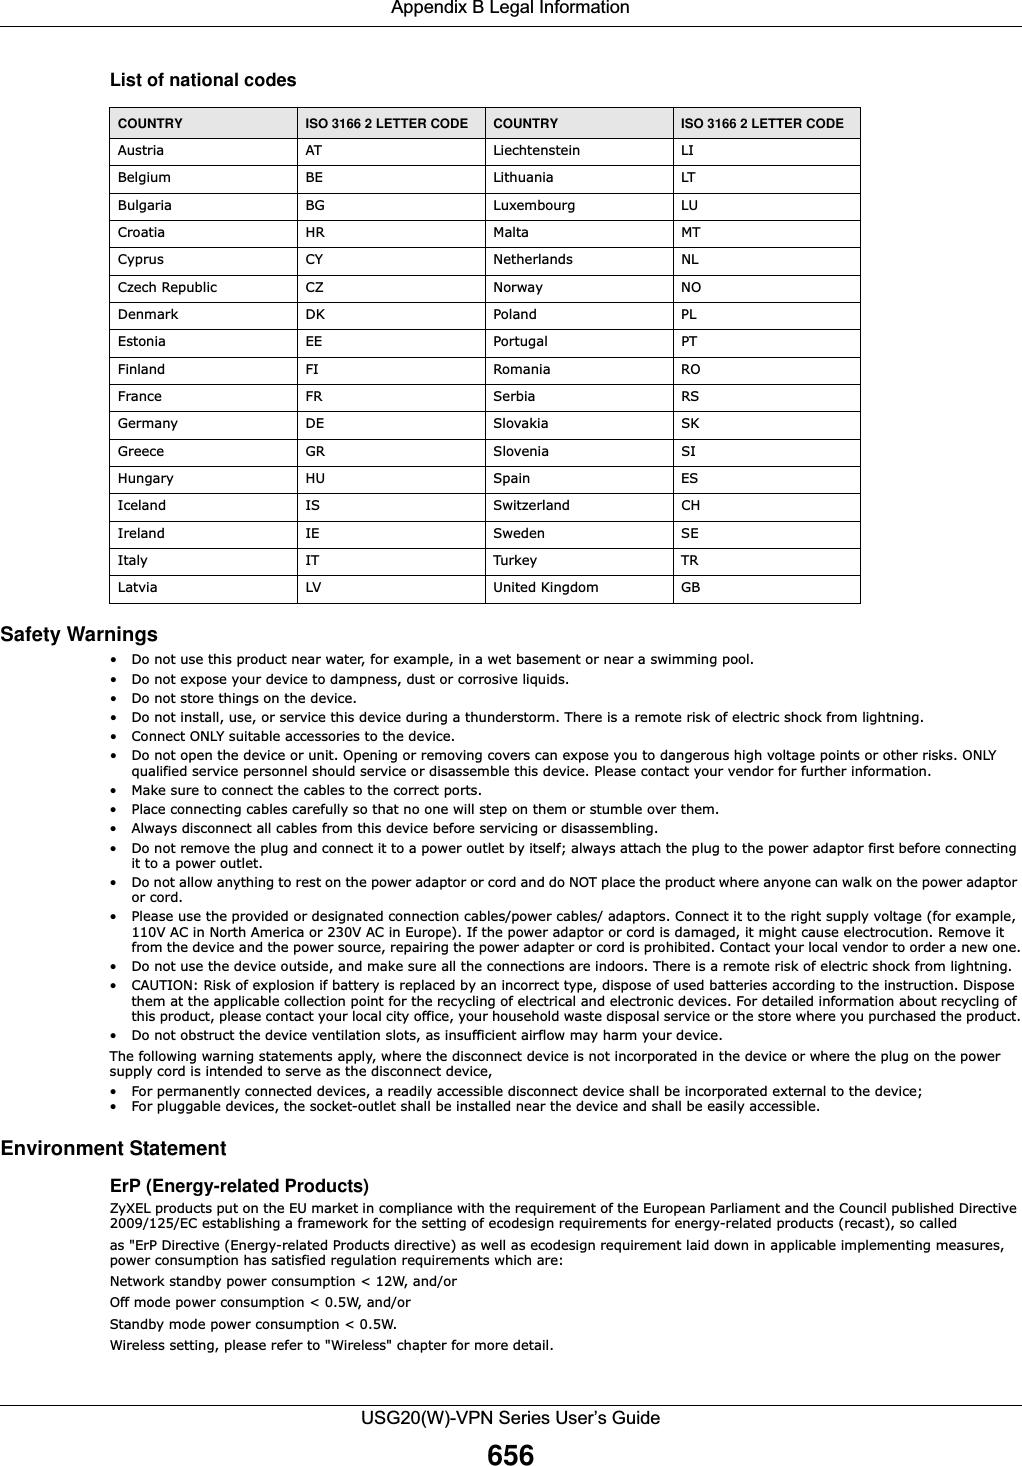 Appendix B Legal InformationUSG20(W)-VPN Series User’s Guide656List of national codesSafety Warnings• Do not use this product near water, for example, in a wet basement or near a swimming pool.• Do not expose your device to dampness, dust or corrosive liquids.• Do not store things on the device.• Do not install, use, or service this device during a thunderstorm. There is a remote risk of electric shock from lightning.• Connect ONLY suitable accessories to the device.• Do not open the device or unit. Opening or removing covers can expose you to dangerous high voltage points or other risks. ONLY qualified service personnel should service or disassemble this device. Please contact your vendor for further information.• Make sure to connect the cables to the correct ports.• Place connecting cables carefully so that no one will step on them or stumble over them.• Always disconnect all cables from this device before servicing or disassembling.• Do not remove the plug and connect it to a power outlet by itself; always attach the plug to the power adaptor first before connecting it to a power outlet.• Do not allow anything to rest on the power adaptor or cord and do NOT place the product where anyone can walk on the power adaptor or cord.• Please use the provided or designated connection cables/power cables/ adaptors. Connect it to the right supply voltage (for example, 110V AC in North America or 230V AC in Europe). If the power adaptor or cord is damaged, it might cause electrocution. Remove it from the device and the power source, repairing the power adapter or cord is prohibited. Contact your local vendor to order a new one.• Do not use the device outside, and make sure all the connections are indoors. There is a remote risk of electric shock from lightning.• CAUTION: Risk of explosion if battery is replaced by an incorrect type, dispose of used batteries according to the instruction. Dispose them at the applicable collection point for the recycling of electrical and electronic devices. For detailed information about recycling of this product, please contact your local city office, your household waste disposal service or the store where you purchased the product.• Do not obstruct the device ventilation slots, as insufficient airflow may harm your device.The following warning statements apply, where the disconnect device is not incorporated in the device or where the plug on the power supply cord is intended to serve as the disconnect device,• For permanently connected devices, a readily accessible disconnect device shall be incorporated external to the device;• For pluggable devices, the socket-outlet shall be installed near the device and shall be easily accessible.Environment StatementErP (Energy-related Products) ZyXEL products put on the EU market in compliance with the requirement of the European Parliament and the Council published Directive 2009/125/EC establishing a framework for the setting of ecodesign requirements for energy-related products (recast), so calledas &quot;ErP Directive (Energy-related Products directive) as well as ecodesign requirement laid down in applicable implementing measures, power consumption has satisfied regulation requirements which are:Network standby power consumption &lt; 12W, and/orOff mode power consumption &lt; 0.5W, and/orStandby mode power consumption &lt; 0.5W.Wireless setting, please refer to &quot;Wireless&quot; chapter for more detail.COUNTRY ISO 3166 2 LETTER CODE COUNTRY ISO 3166 2 LETTER CODEAustria AT Liechtenstein LIBelgium BE Lithuania LTBulgaria BG Luxembourg LUCroatia HR Malta MTCyprus CY Netherlands NLCzech Republic CZ Norway NODenmark DK Poland PLEstonia EE Portugal PTFinland FI Romania ROFrance FR Serbia RSGermany DE Slovakia SKGreece GR Slovenia SIHungary HU Spain ESIceland IS Switzerland CHIreland IE Sweden SEItaly IT Turkey TRLatvia LV United Kingdom GB